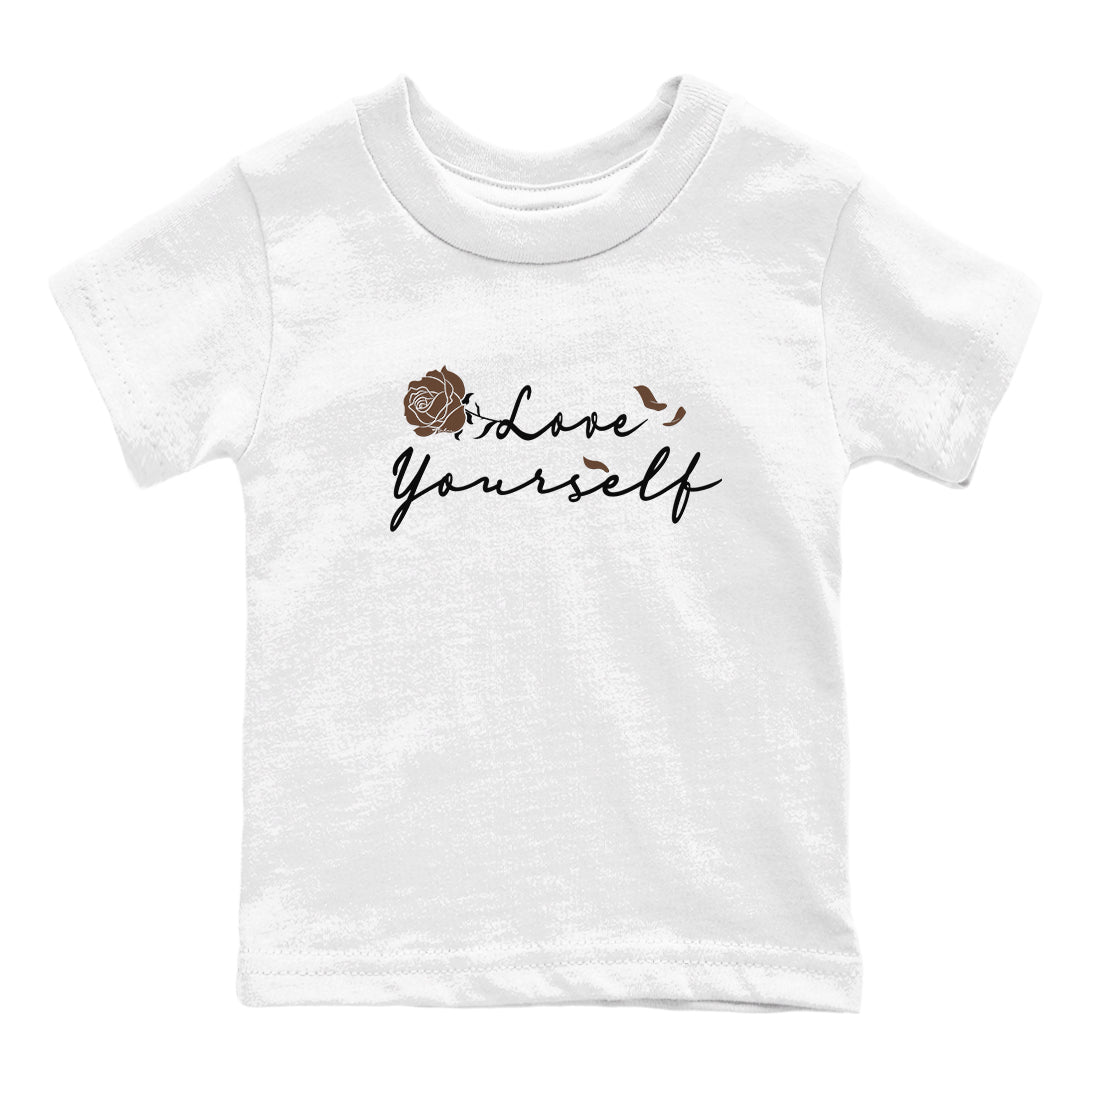 Yeezy Slide Flax shirts to match jordans Love Yourself sneaker match tees Yeezy Slide Flax SNRT Sneaker Tees streetwear brand Baby and Youth White 2 cotton tee